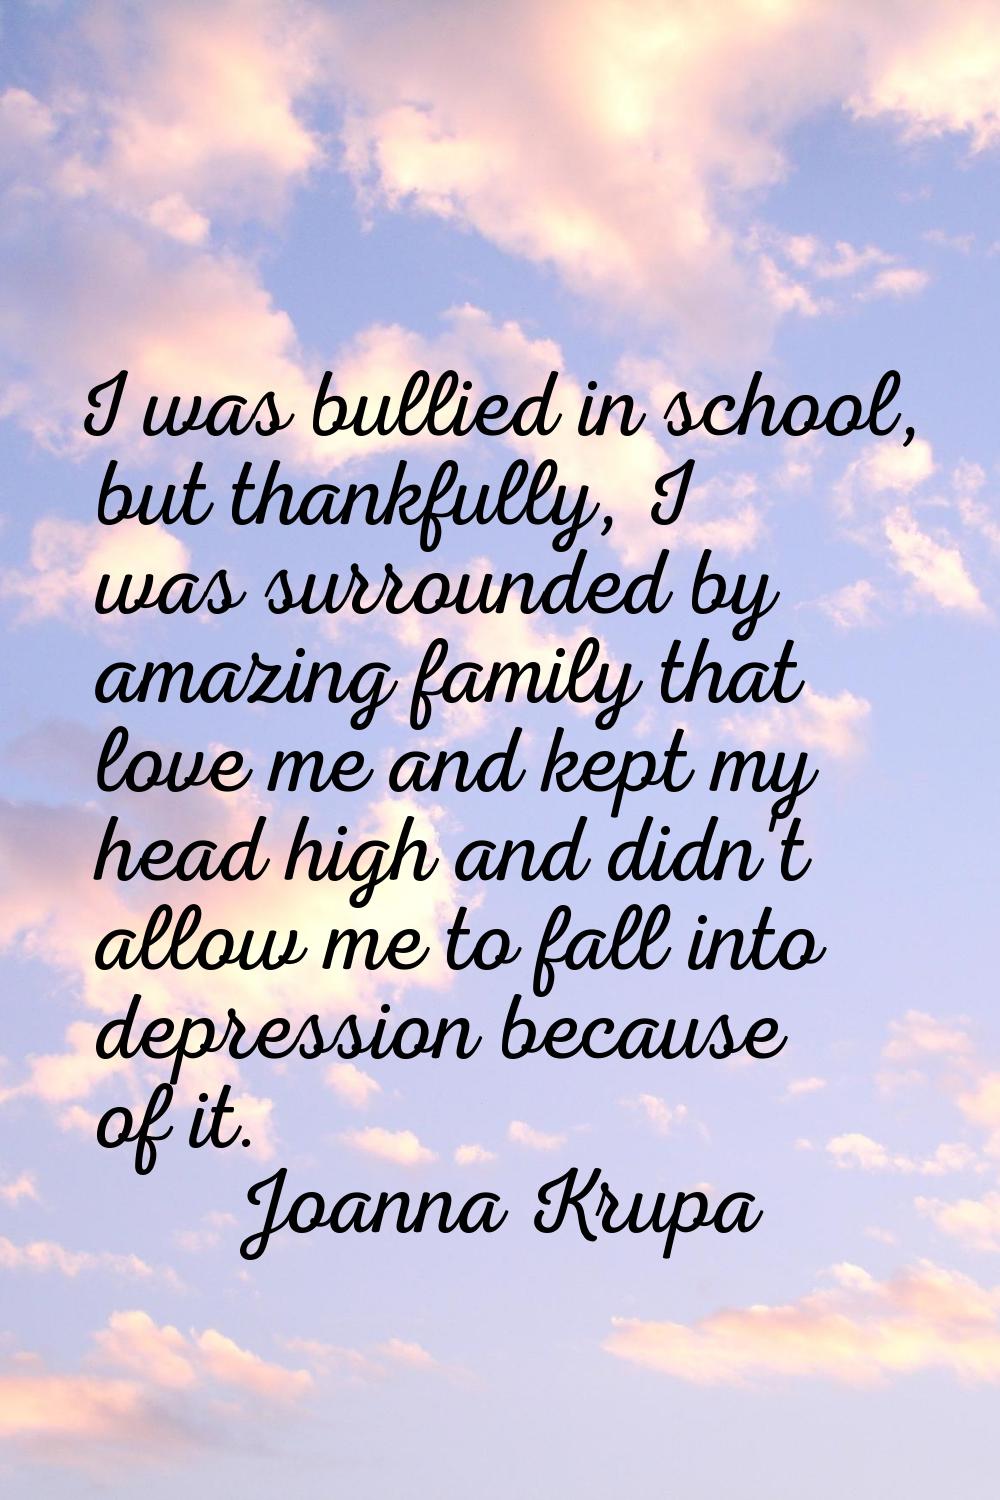 I was bullied in school, but thankfully, I was surrounded by amazing family that love me and kept m